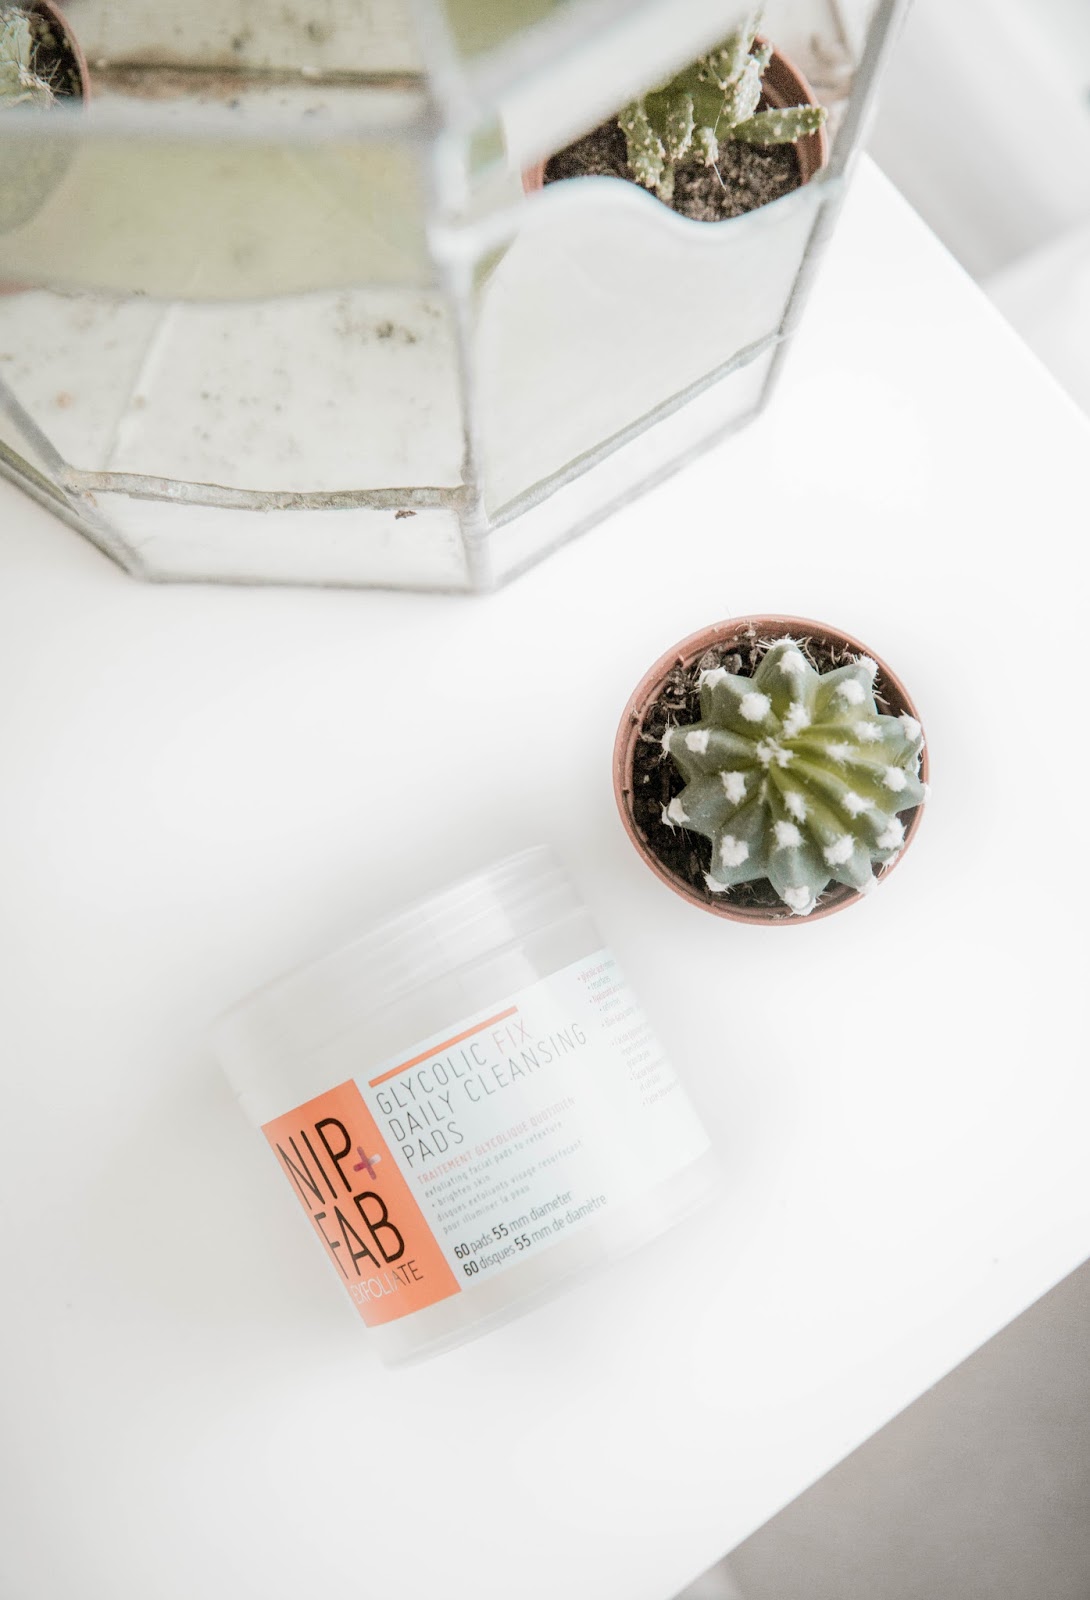 nip-and-fab-glycolic-fix-cleansing-pads